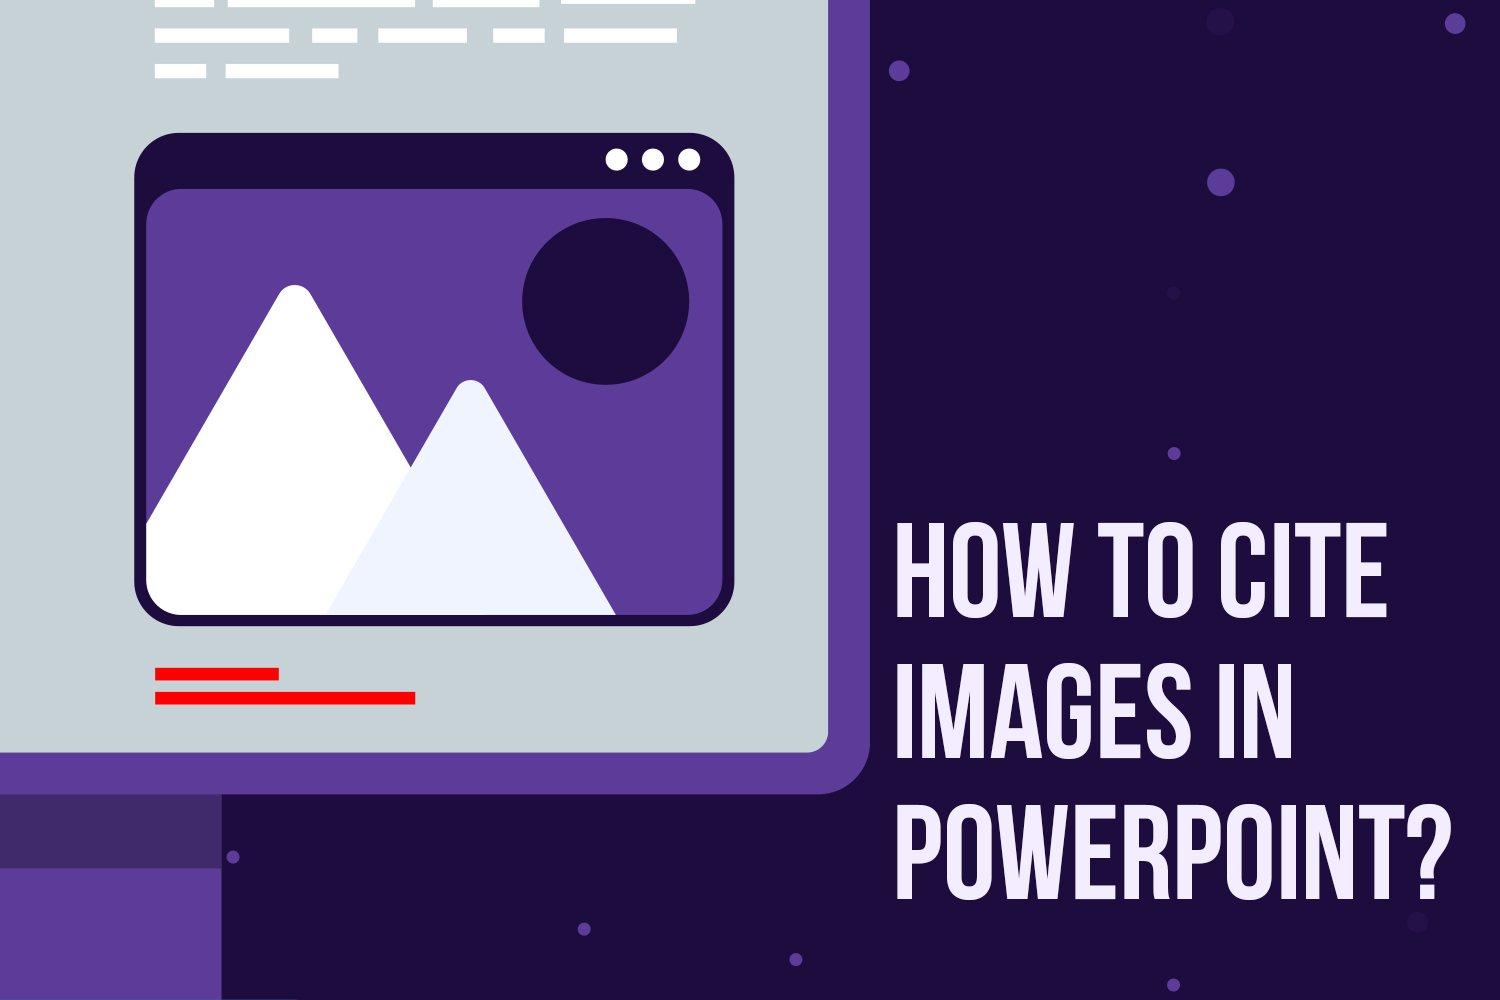 How to cite images in PowerPoint